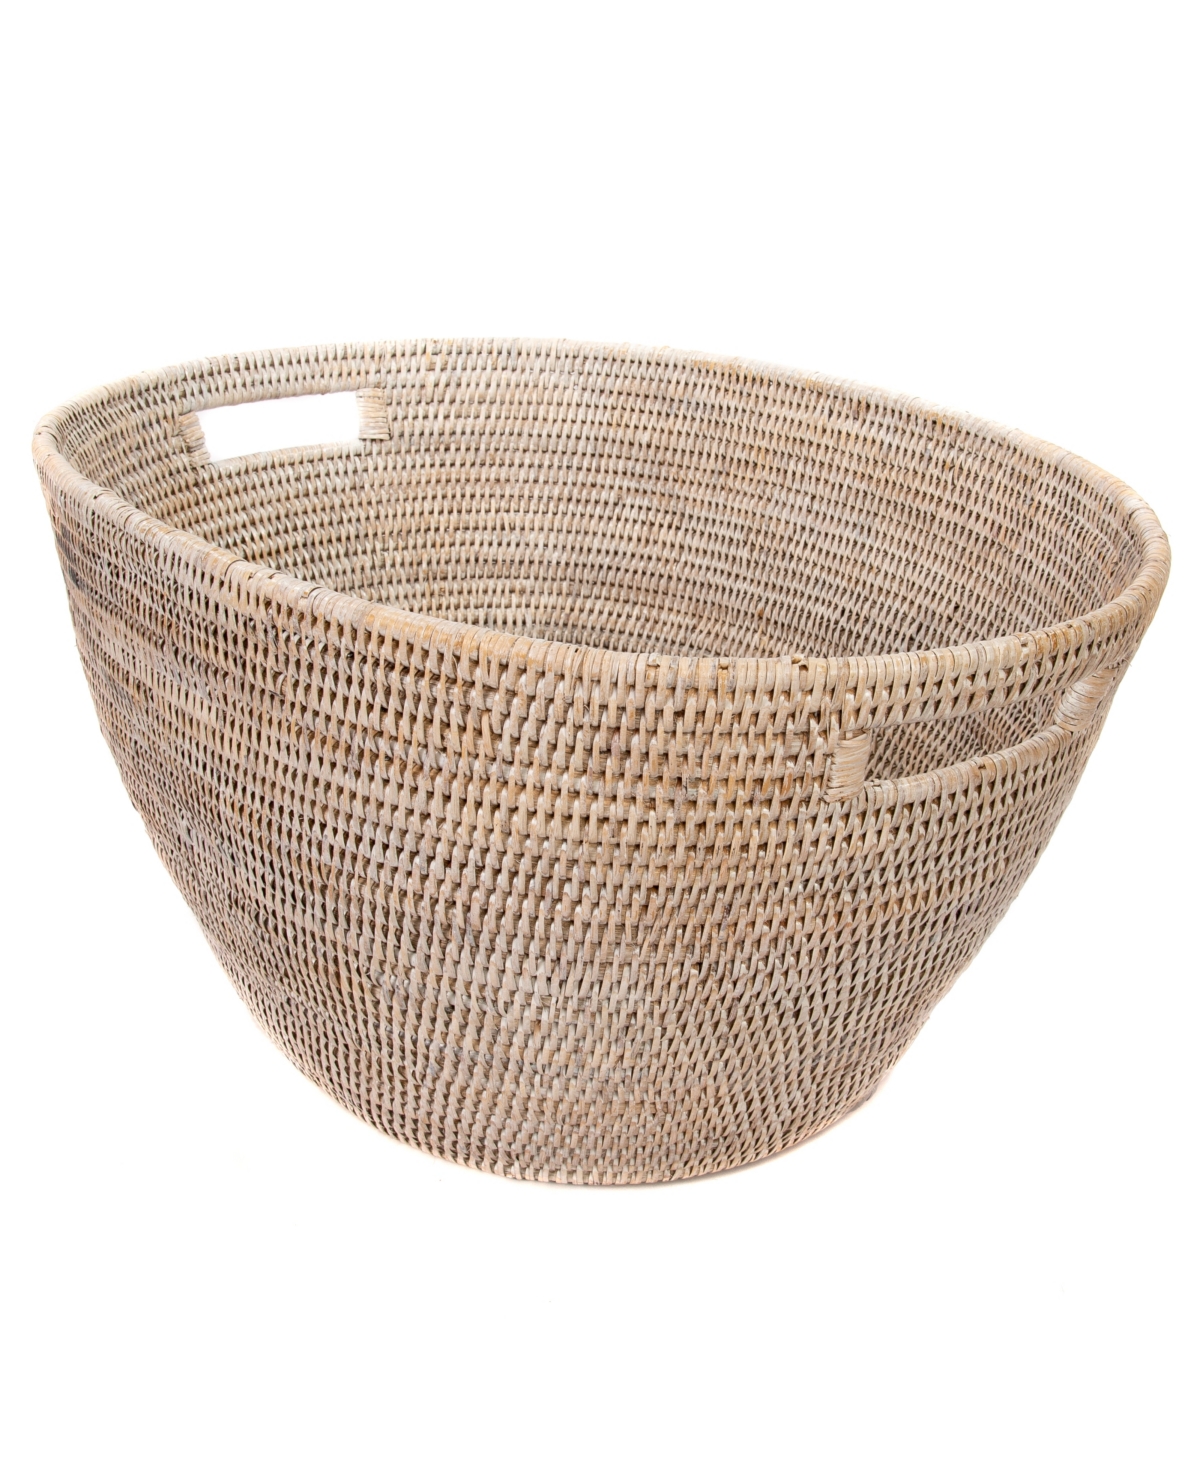 Artifacts Trading Company Artifacts Rattan Laundry Basket In Off-white